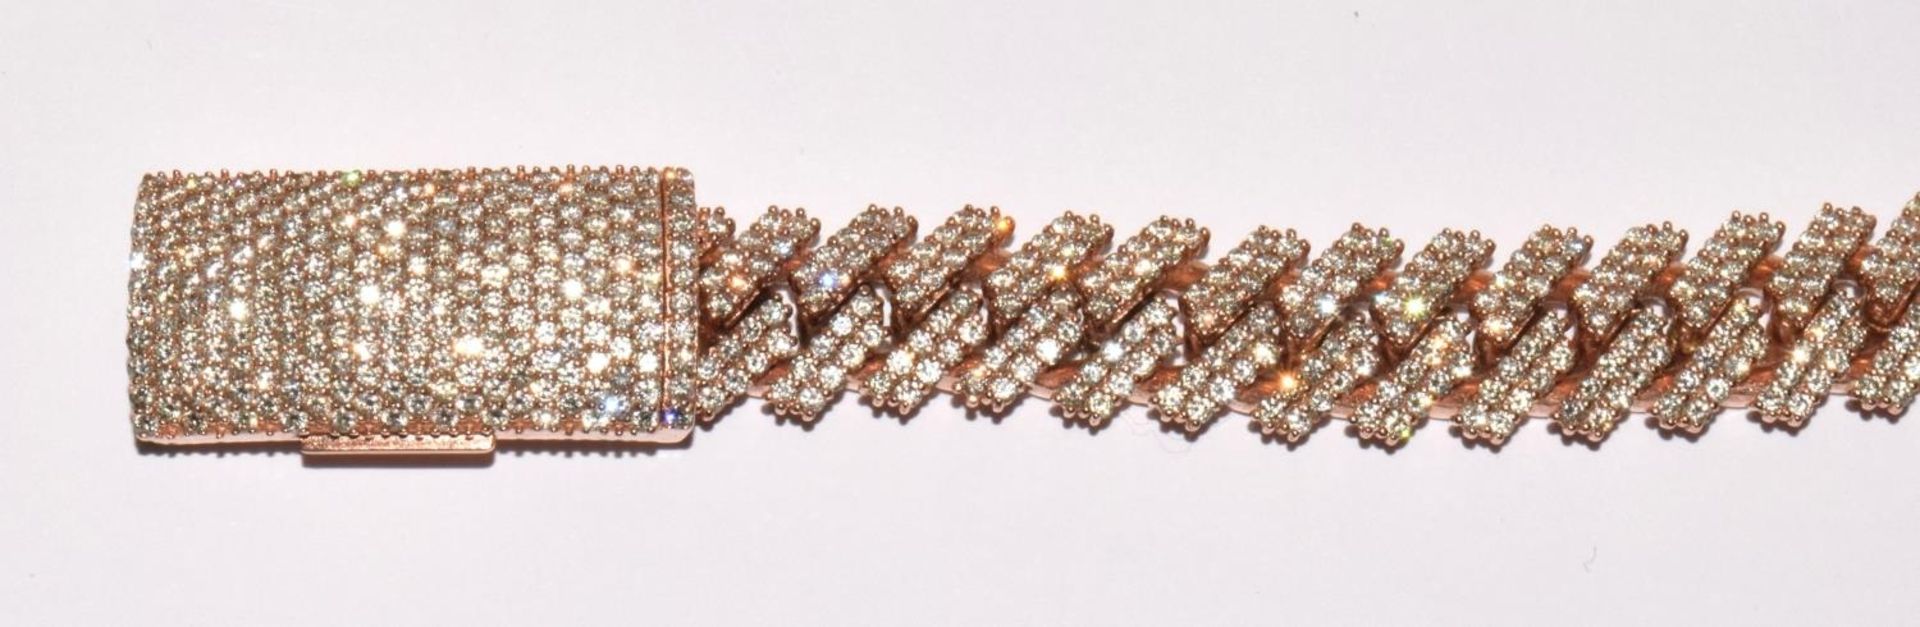 10ct rose gold Diamond encrusted bracelet set with approx 5ct diamonds in a herring bone pattern - Image 3 of 9